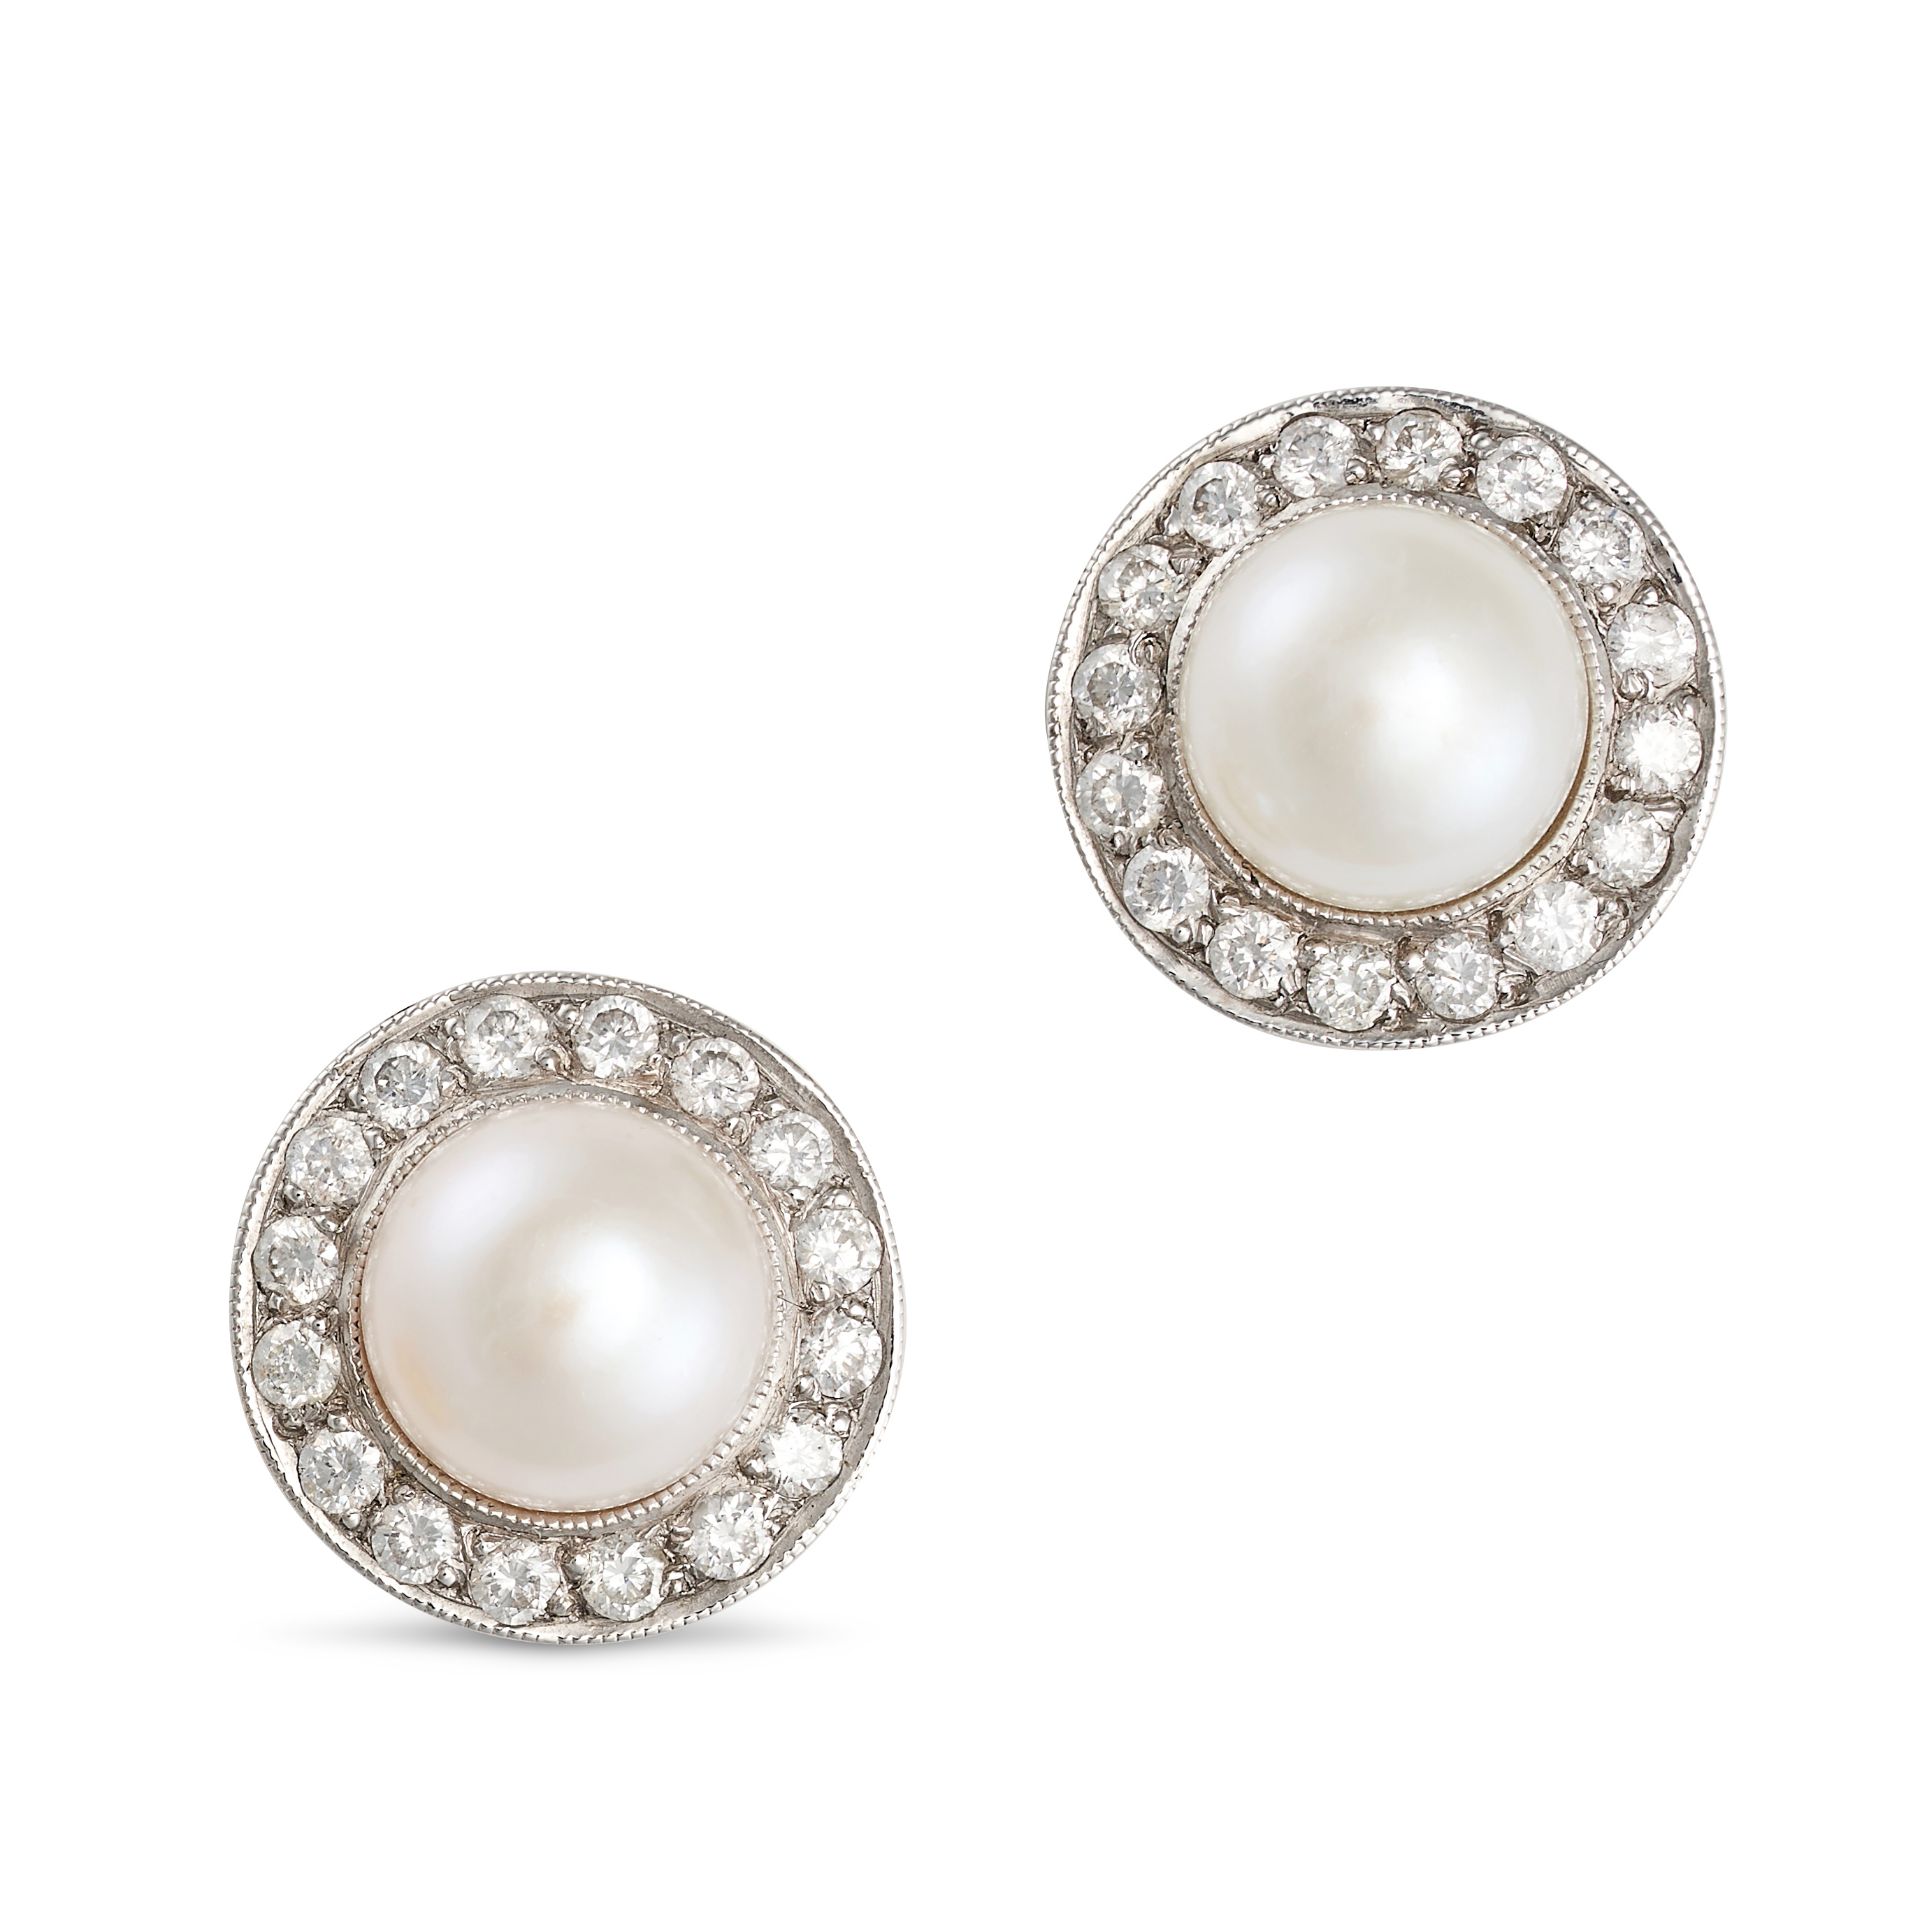 A PAIR OF PEARL AND DIAMOND EARRINGS in 18ct white and yellow gold, each set with a pearl of 8.4m...